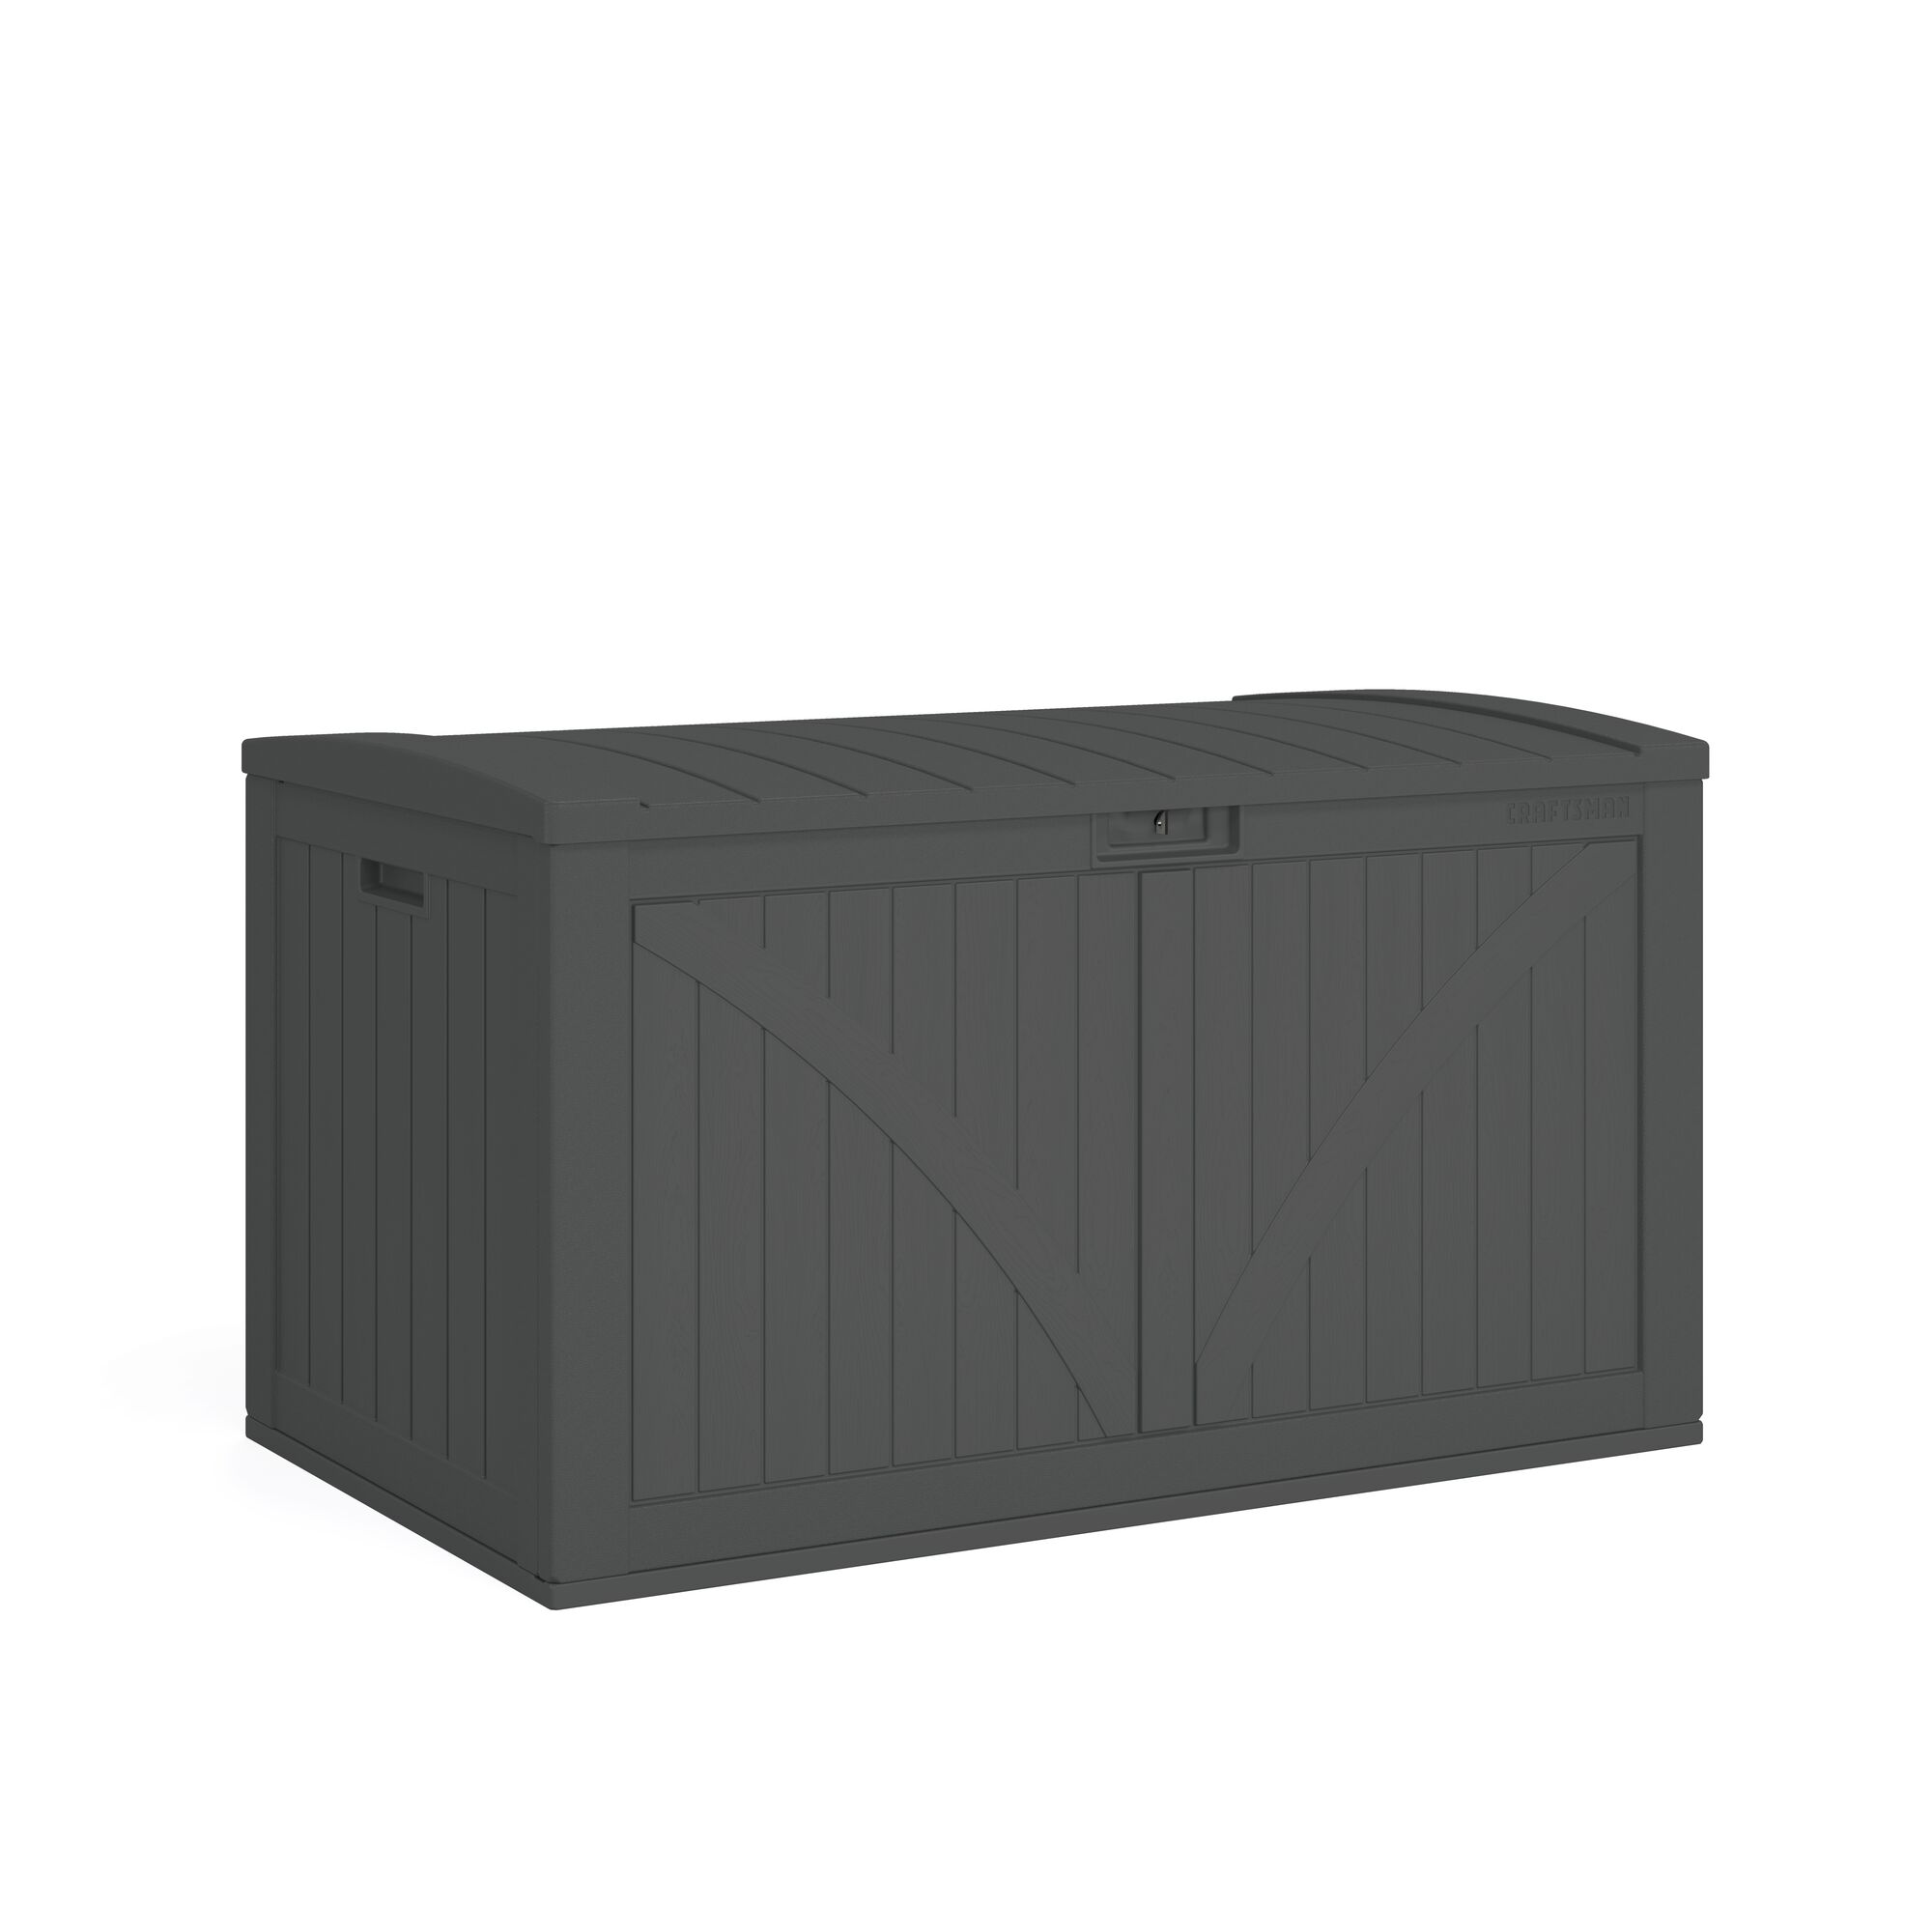 View of CRAFTSMAN Extra Large Deck Box on white background